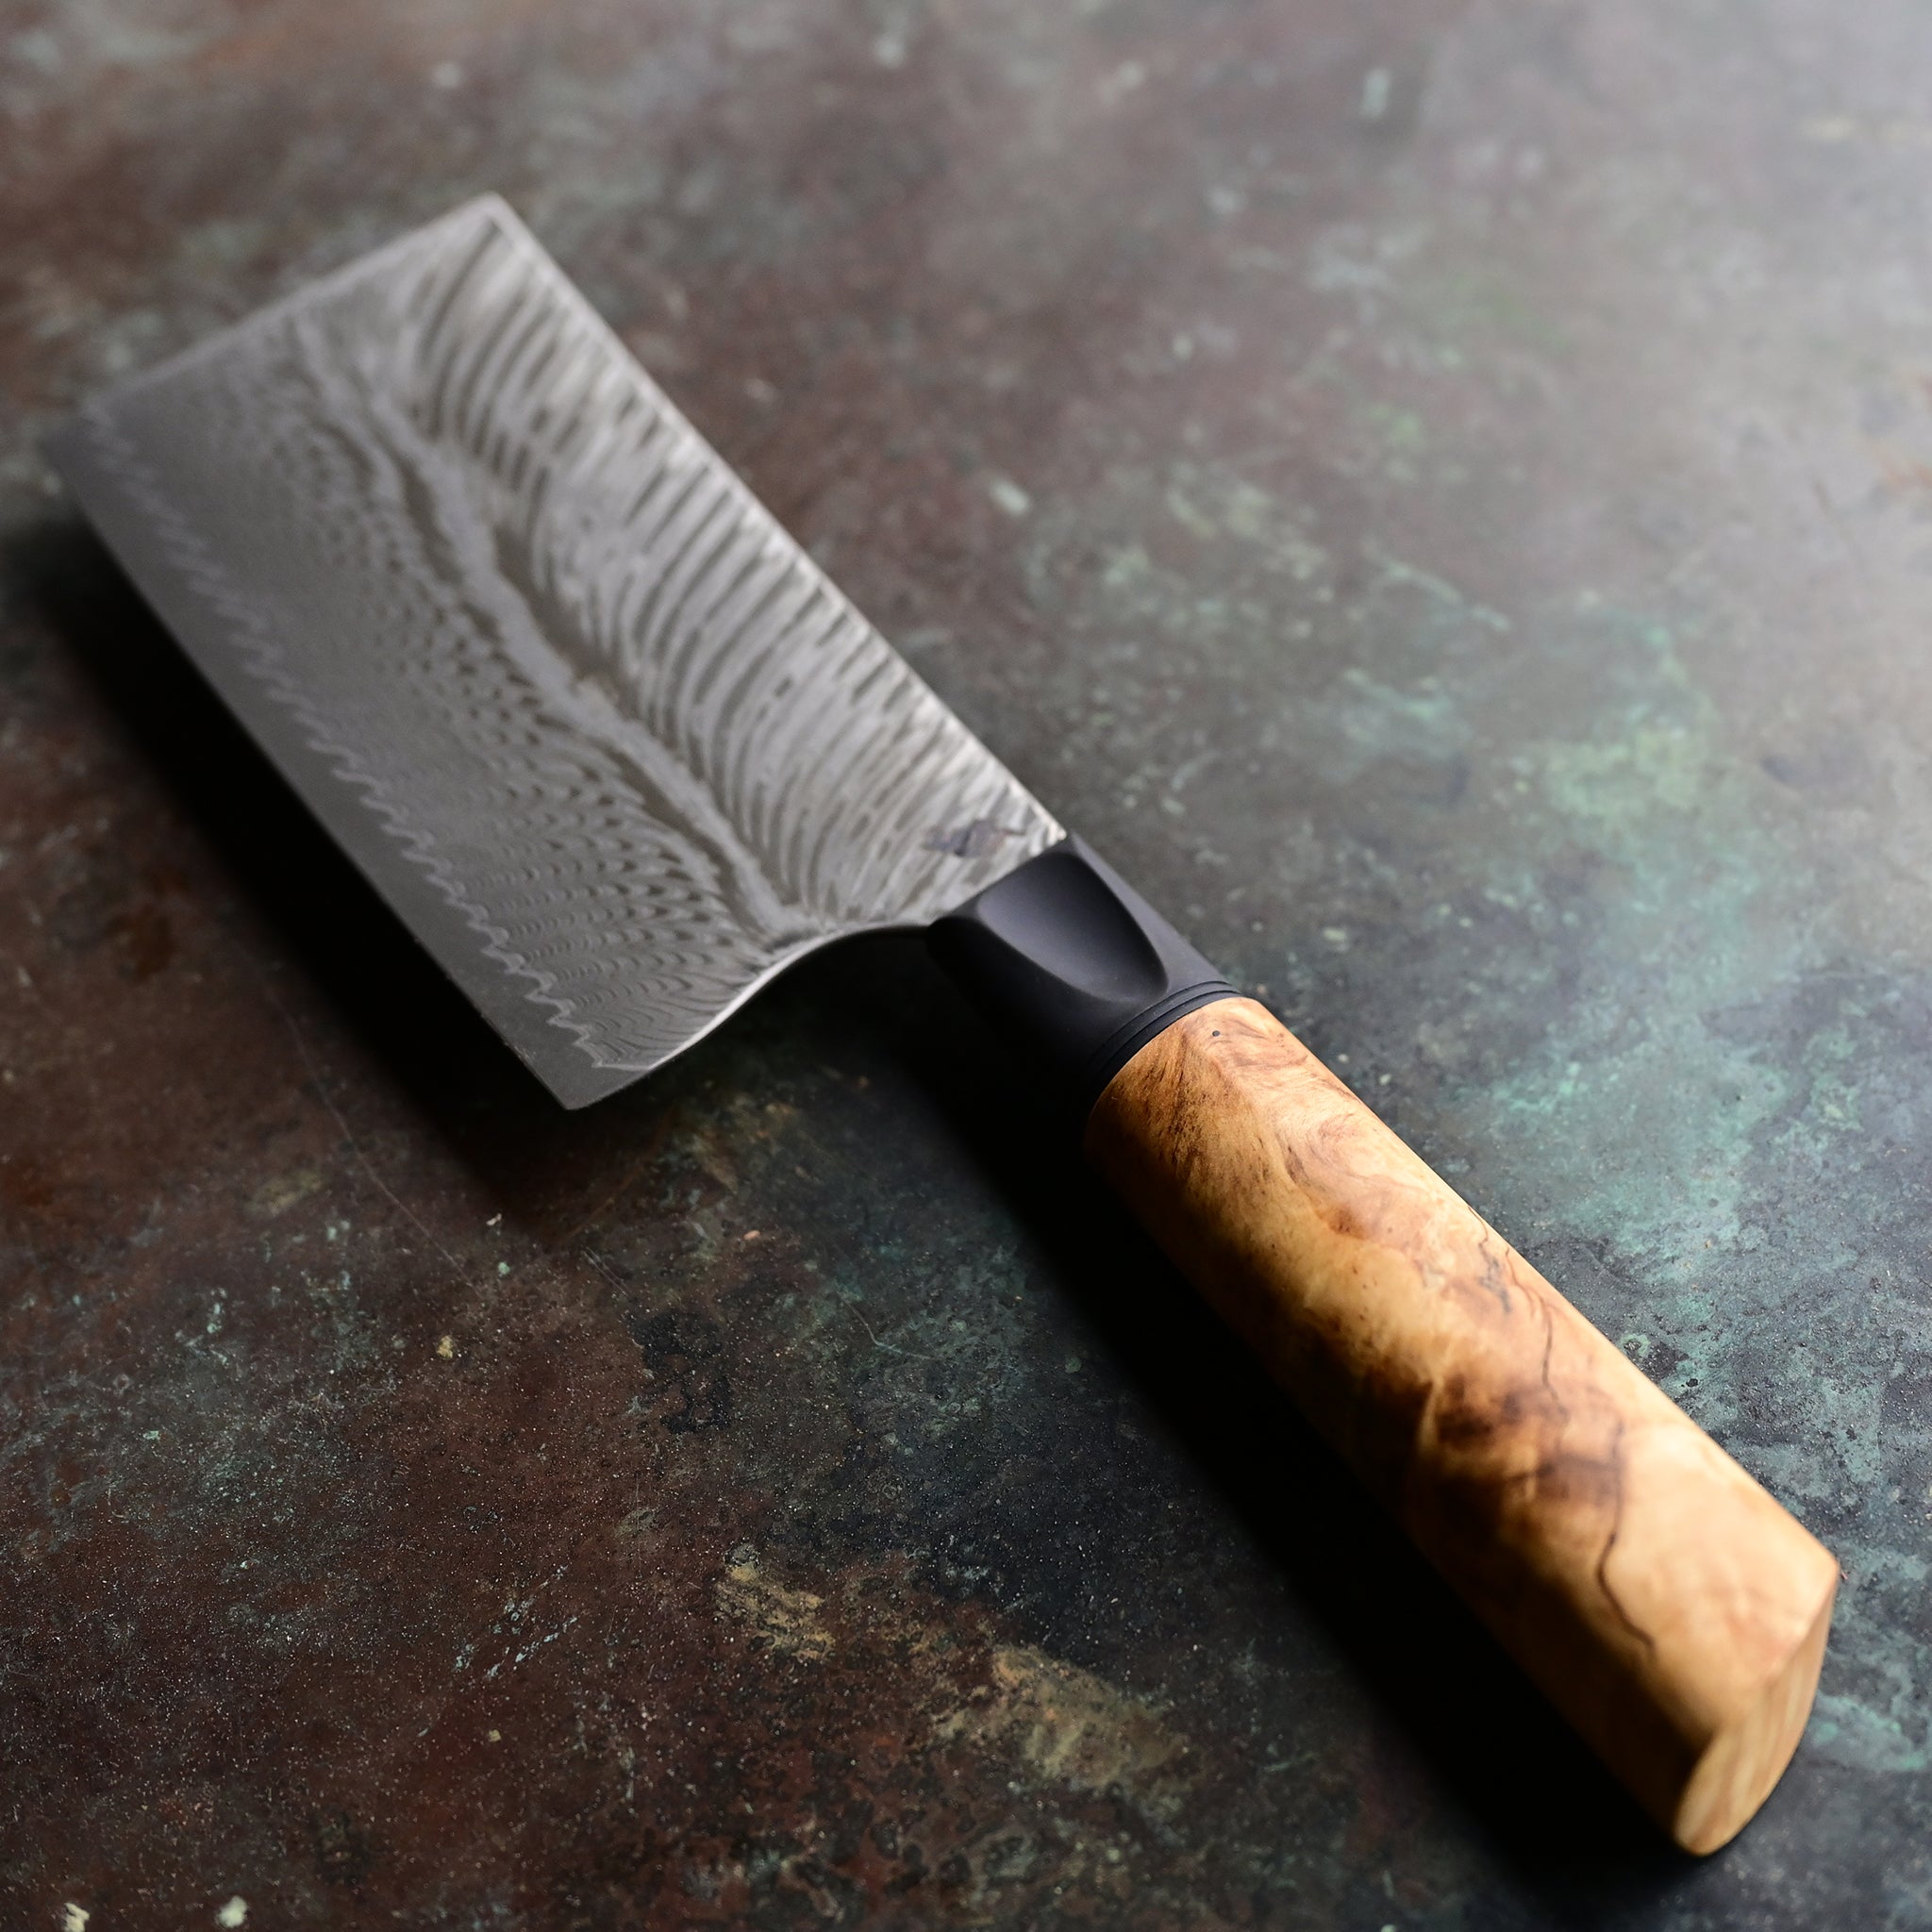 Unique mini cleaver on a concrete background, featuring a 4.5" long feather Damascus VG10 stainless blade, a sleek black anodized bolster, and a stabilized golden Buckeye burl wood handle with intricate patterns and color variations.